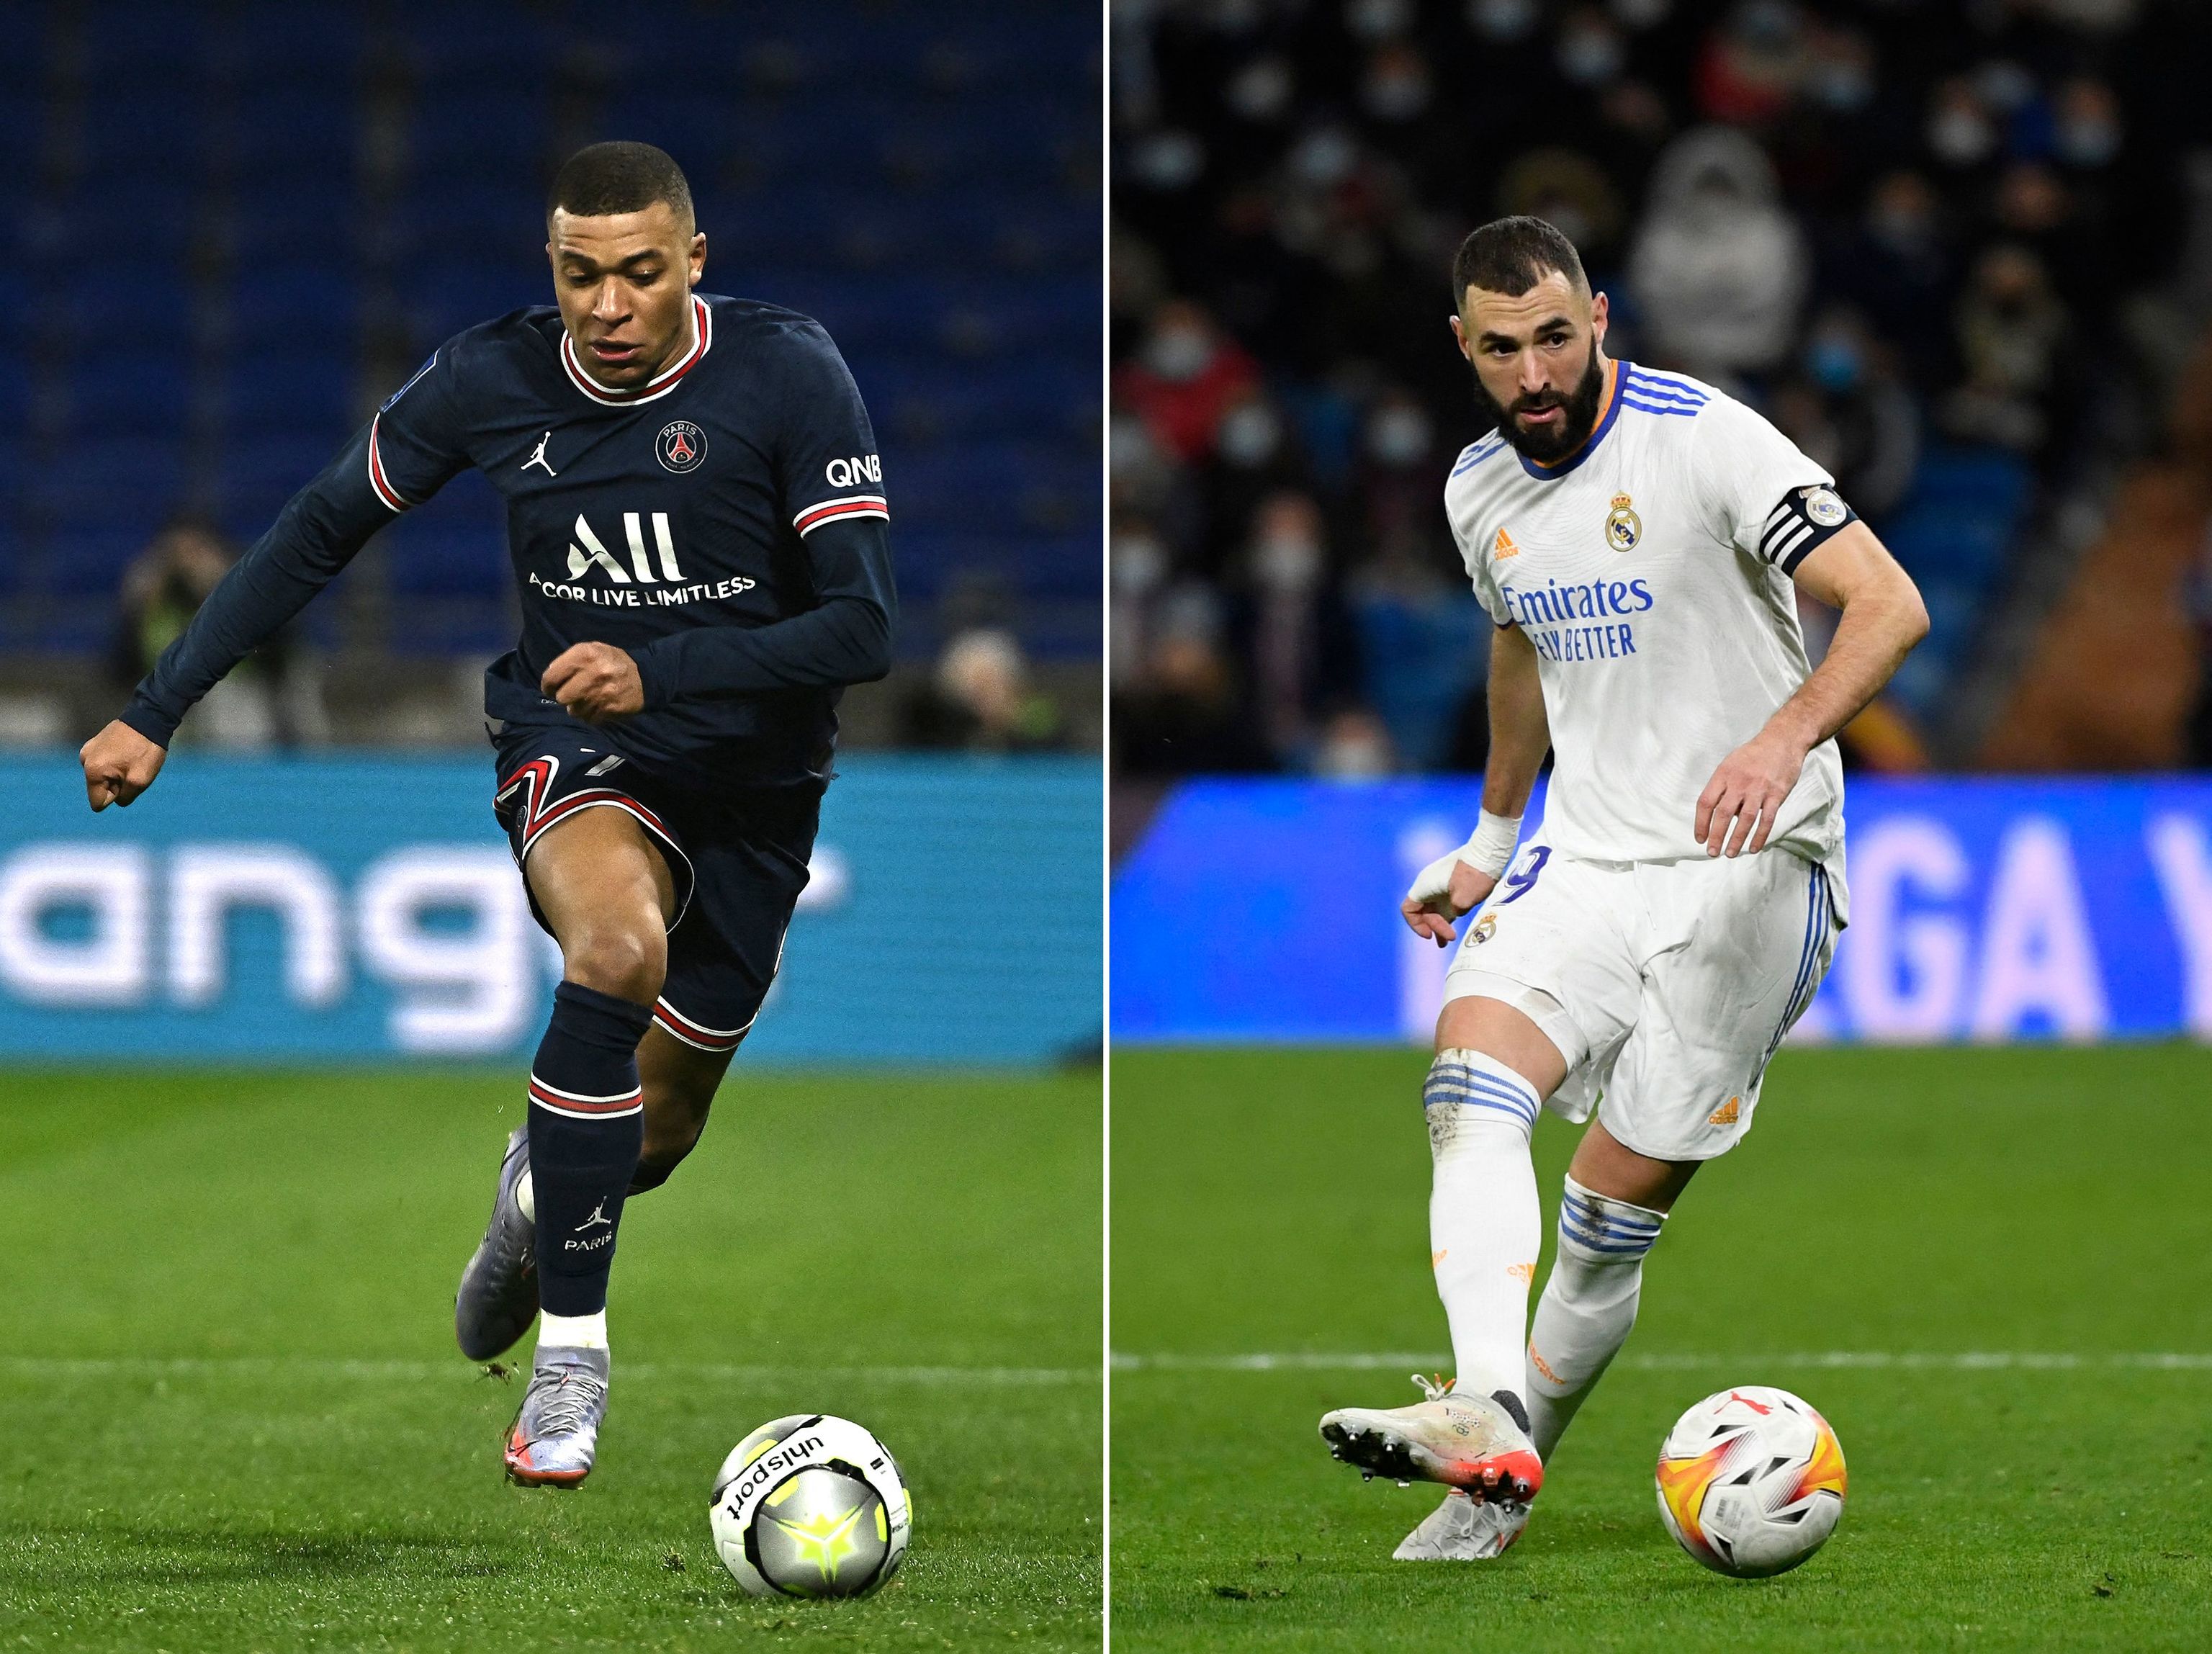 (COMBO) This combination of file pictures made on February 15, 2022, shows (from L to R) Paris Saint-Germain's French forward Kylian  lt;HIT gt;Mbappe lt;/HIT gt; driving the ball during the French L1 football match between Olympique Lyonnais and Paris Saint-Germain at the Groupama stadium in Decines-Charpieu near Lyon on January 9, 2022 and Real Madrid's French forward Karim Benzema kicking the ball during the Spanish league football match between Real Madrid CF and Athletic Club Bilbao at the Santiago Bernabeu stadium in Madrid on December 1, 2021. - Paris Saint-Germain faces Real Madrid in Paris on February 15, 2022, in their UEFA Champions League last 16 first leg football match. (Photo by Pierre-Philippe MARCOU and Jeff PACHOUD / AFP)